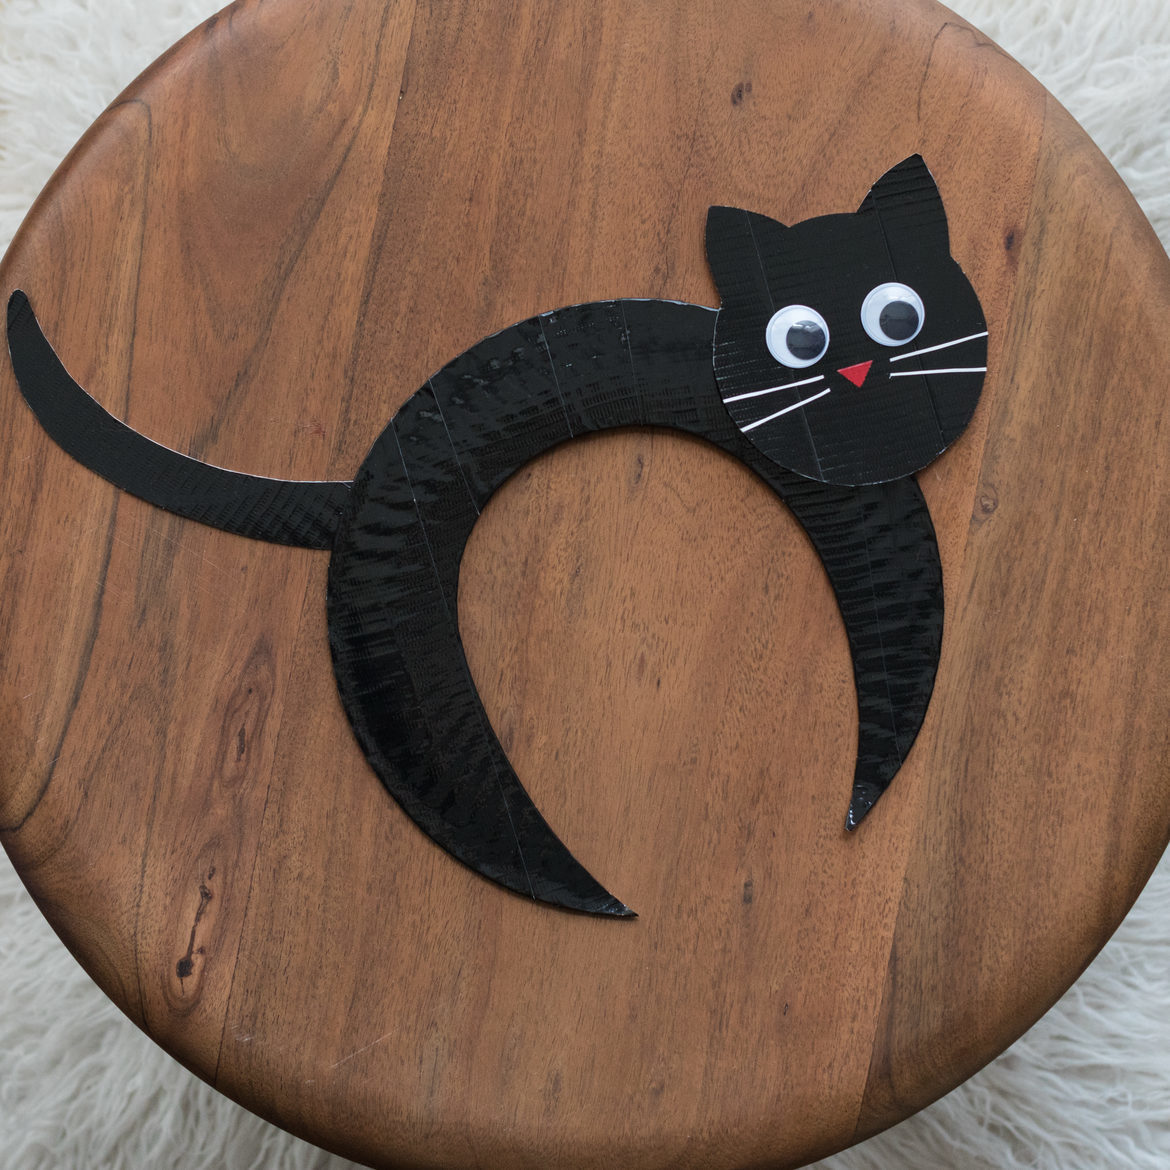 Completed Duck Tape® Paper Plate Black Cat